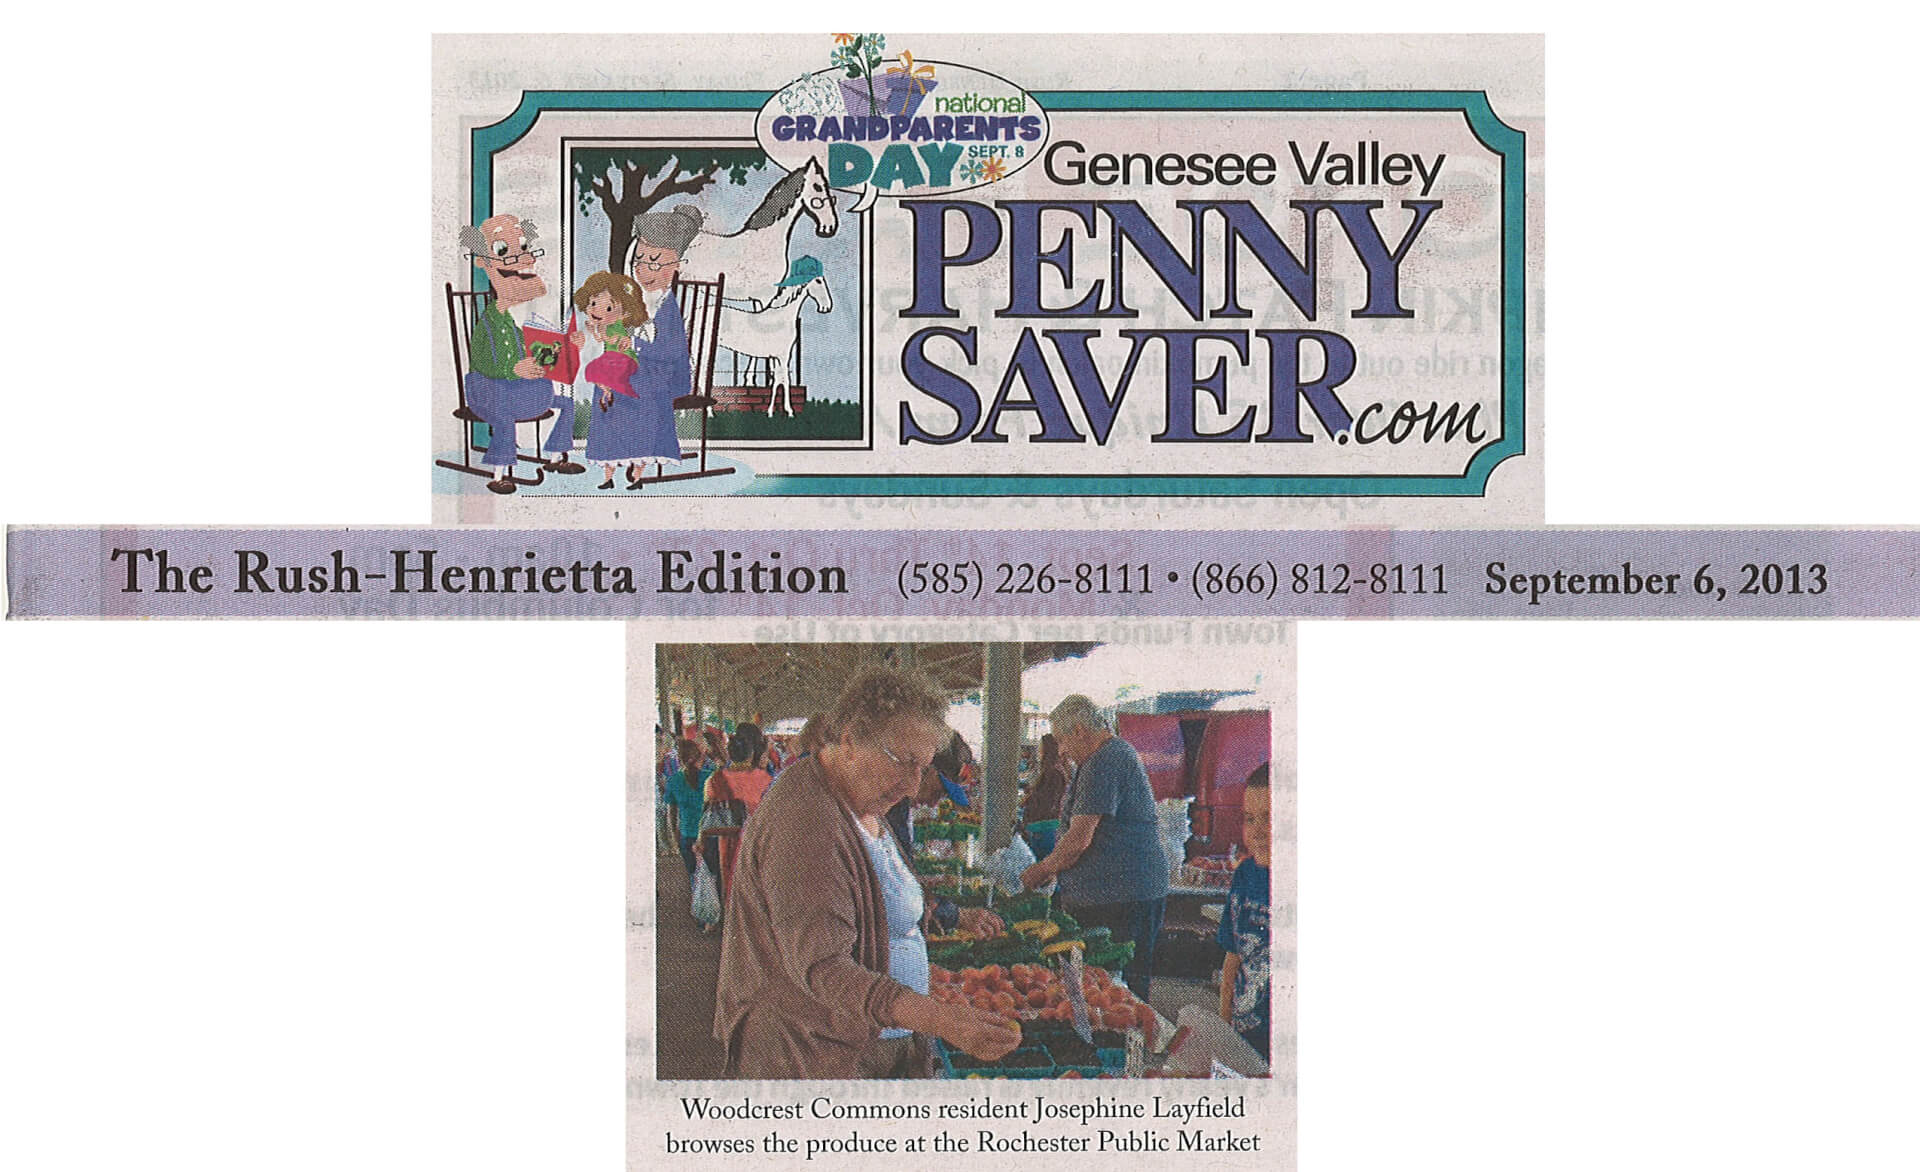 Woodcrest Commons Residents visiting the Rochester Public Market September 2013 in the Genesee Valley Penny Saver 